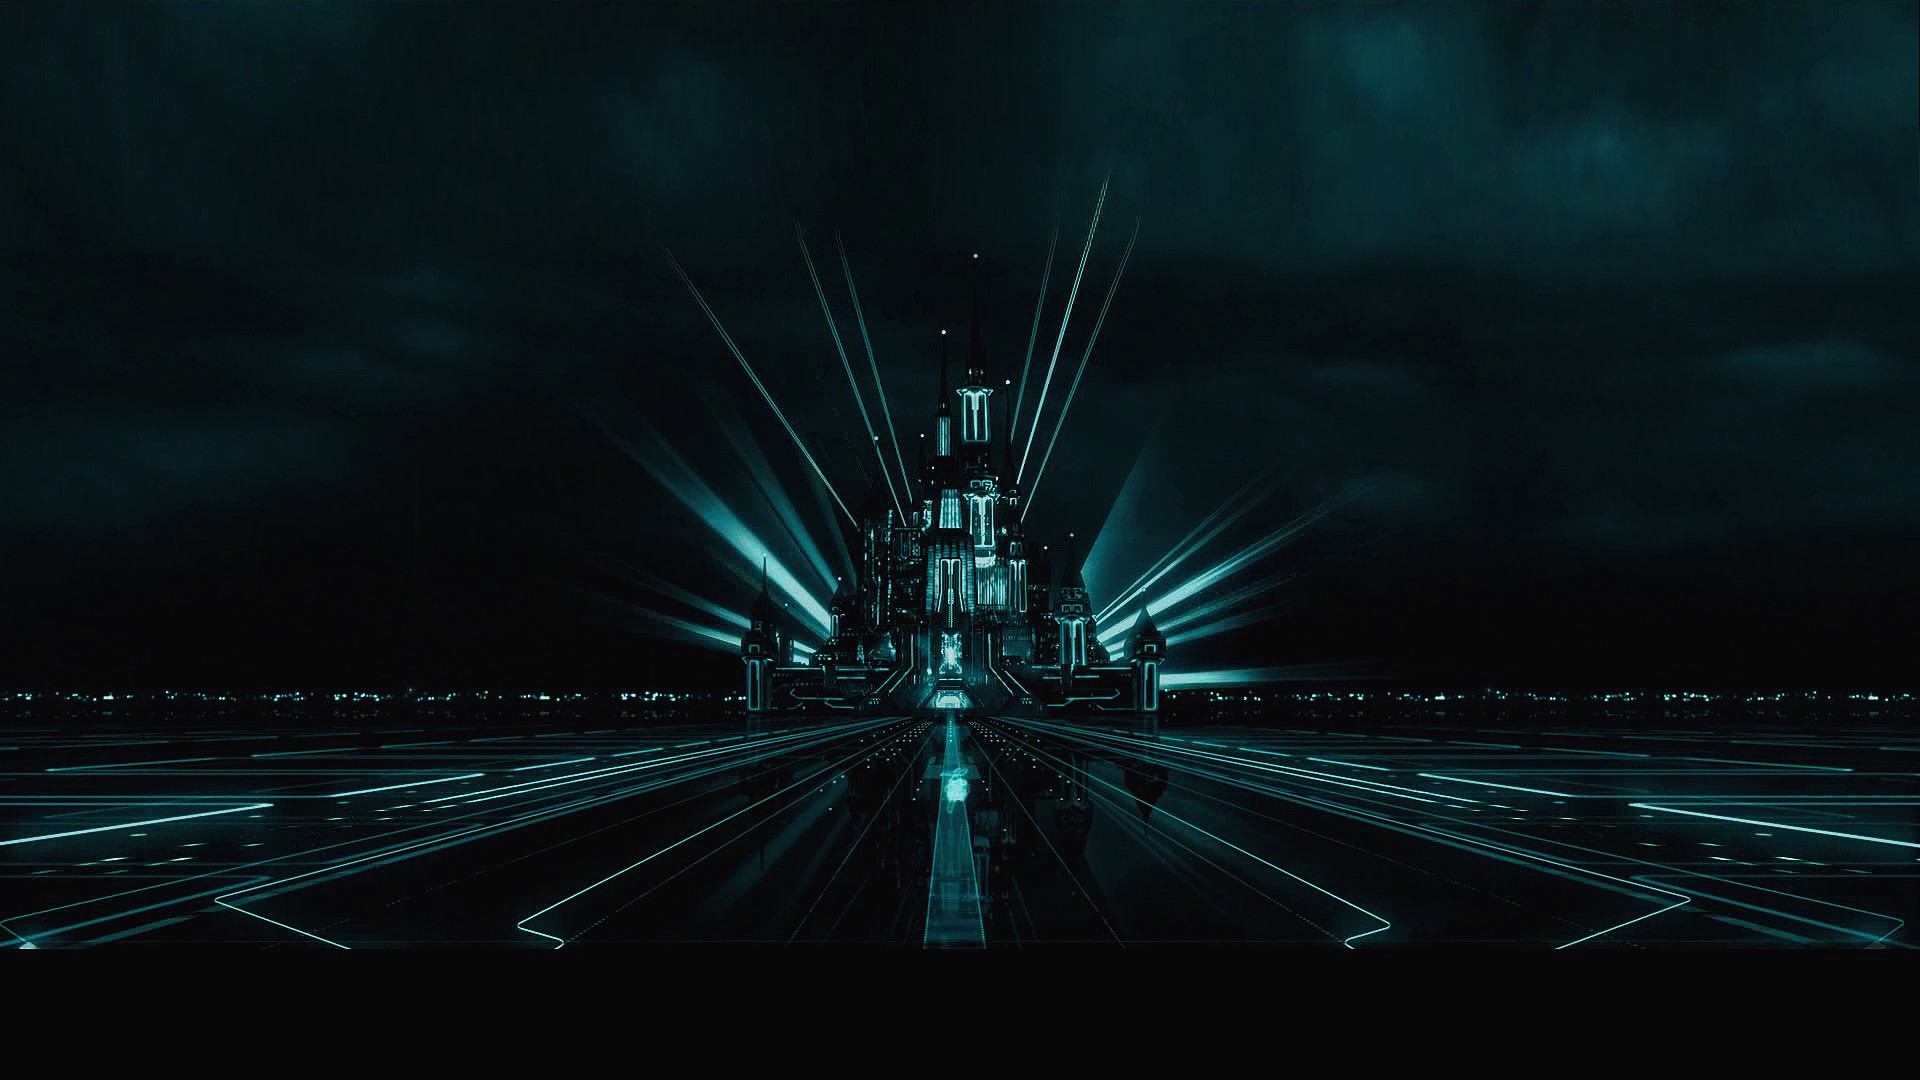 The disney castle from tron You are viewing a Movies Wallpaper